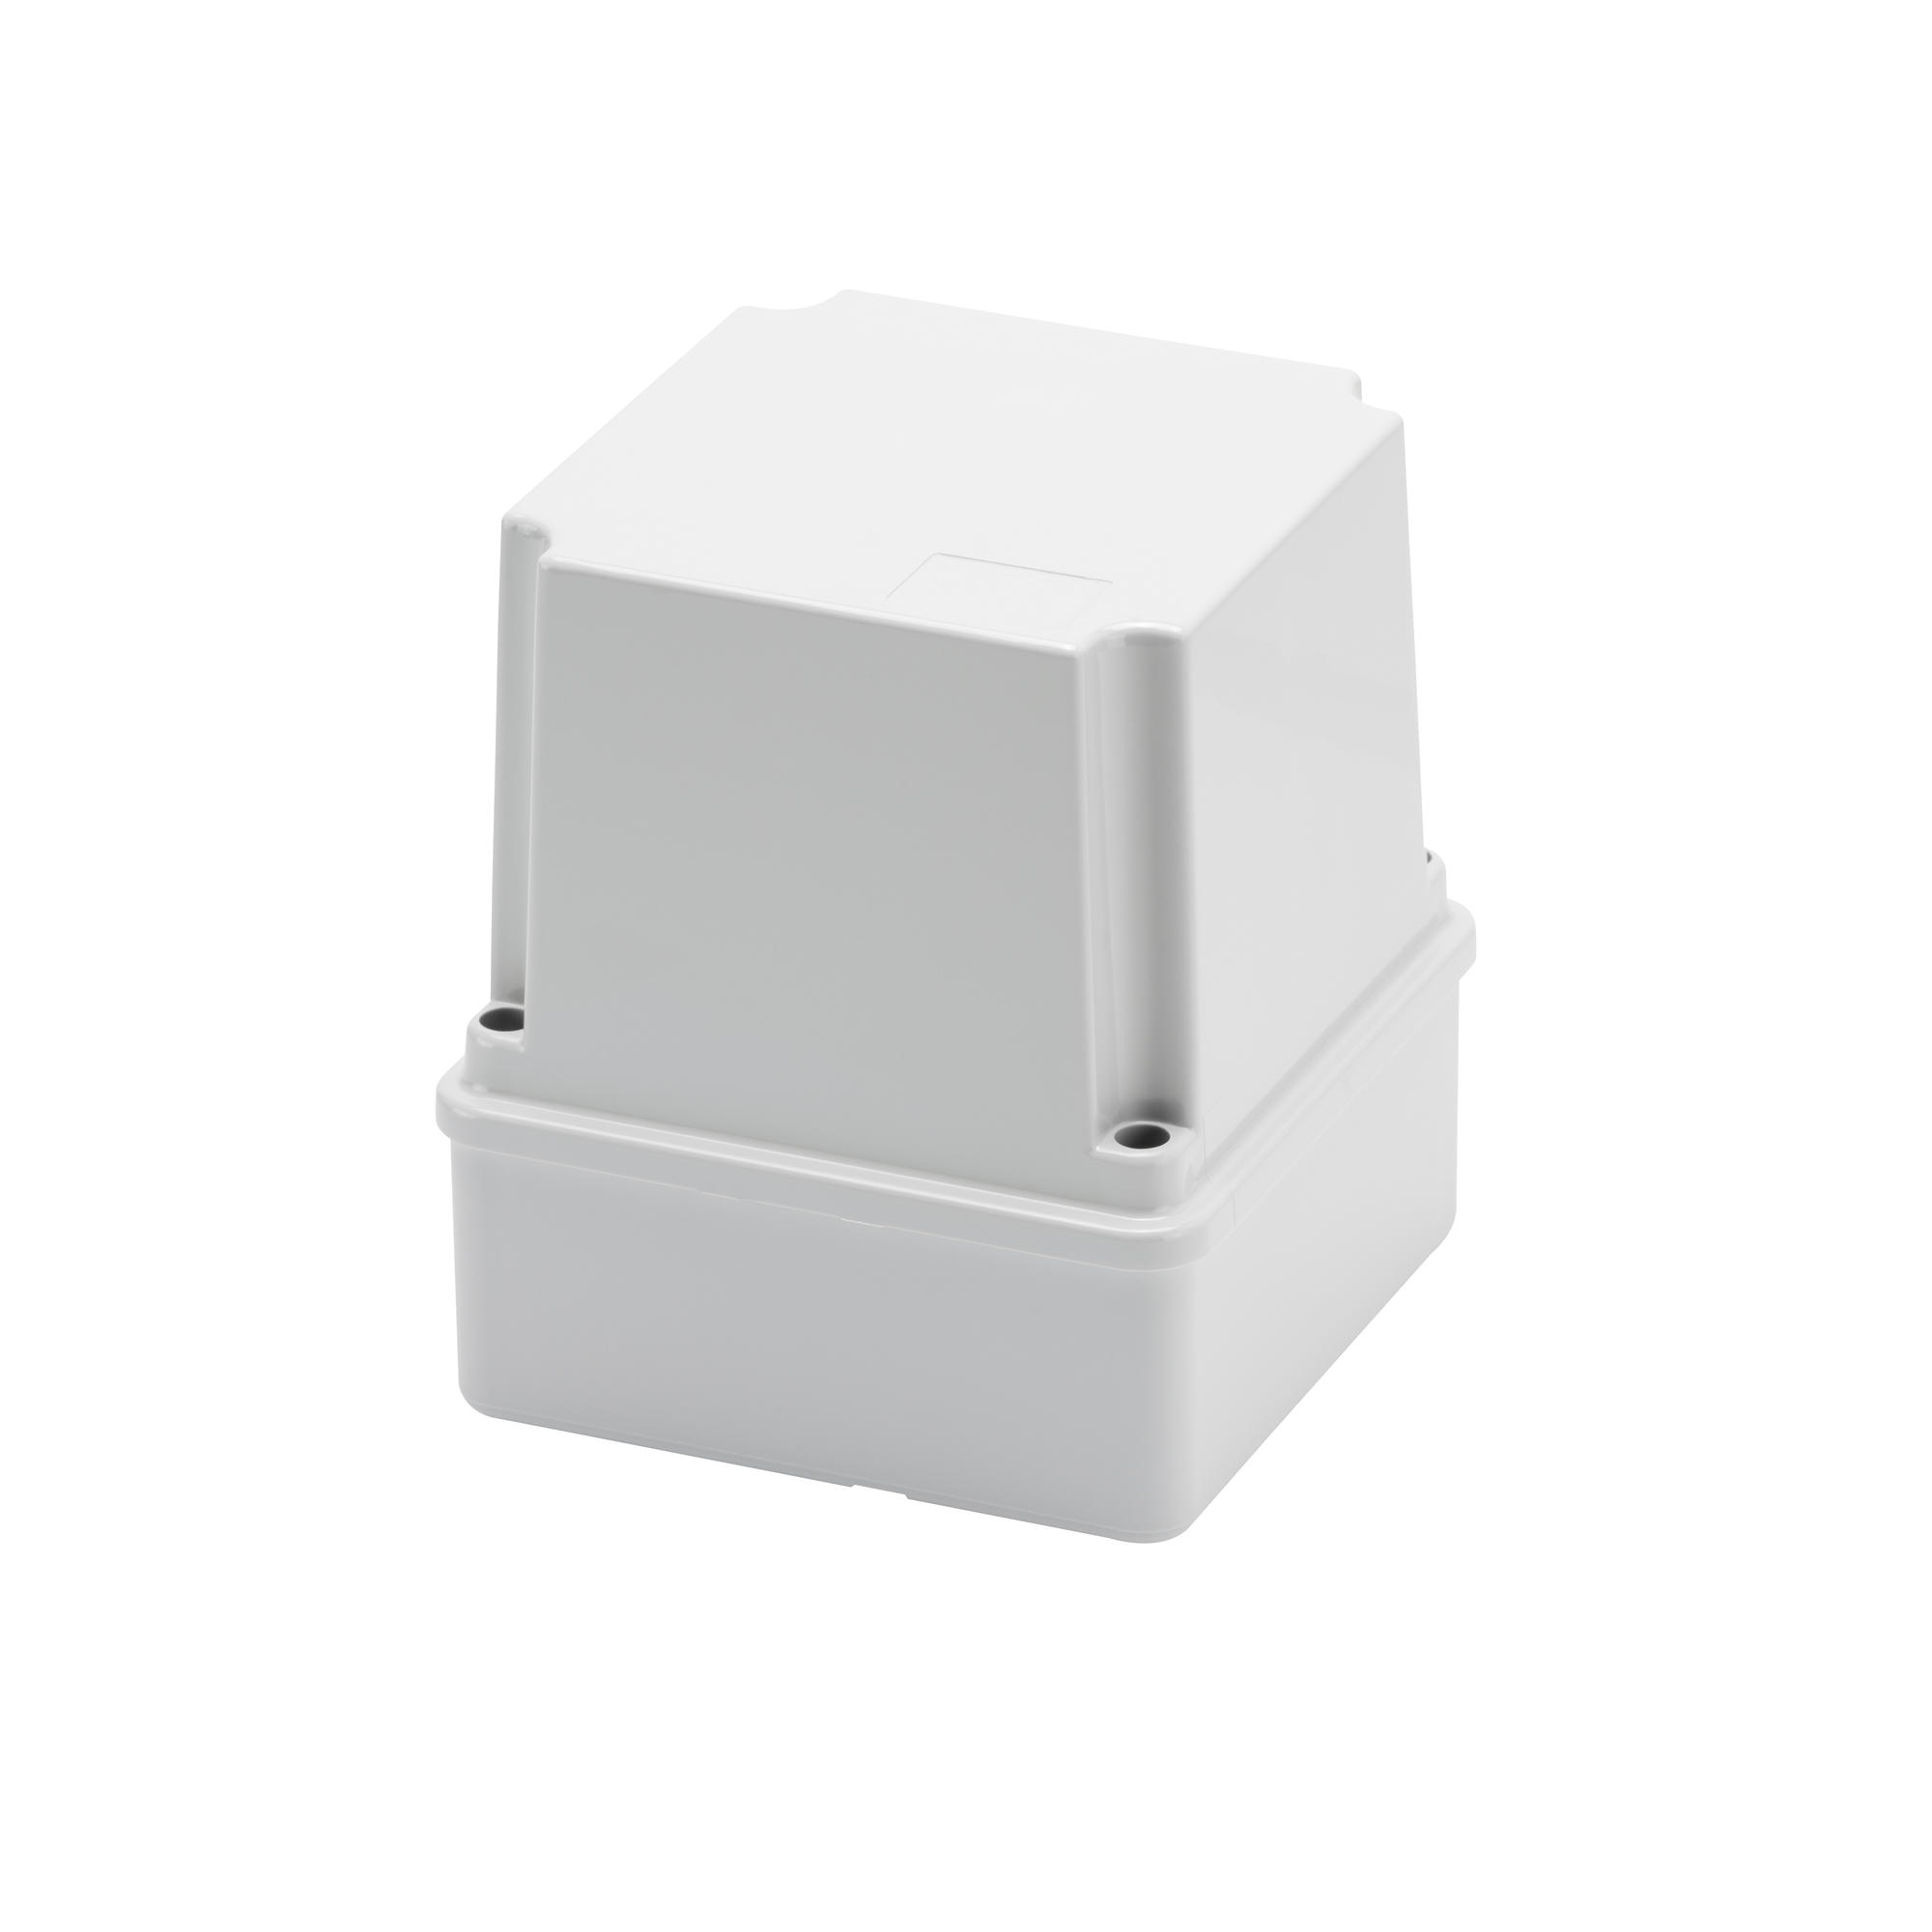 IP56 100X100X120mm GEWISS GW44214 JUNCTION BOXES WITH DEEP SCREWED LID 